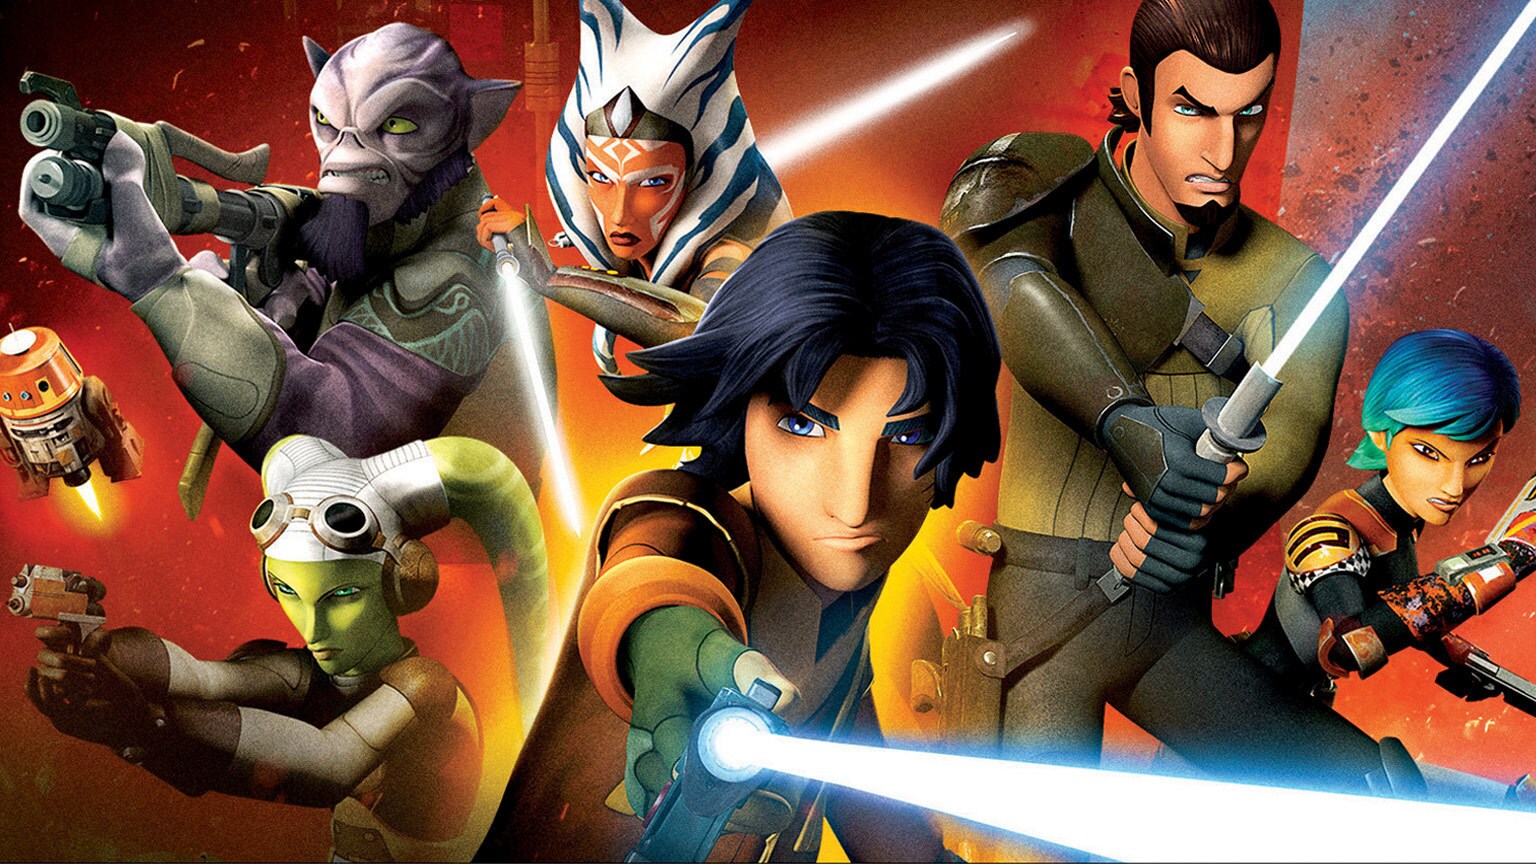 Star Wars Rebels: Complete Season Two Coming to Blu-ray and DVD